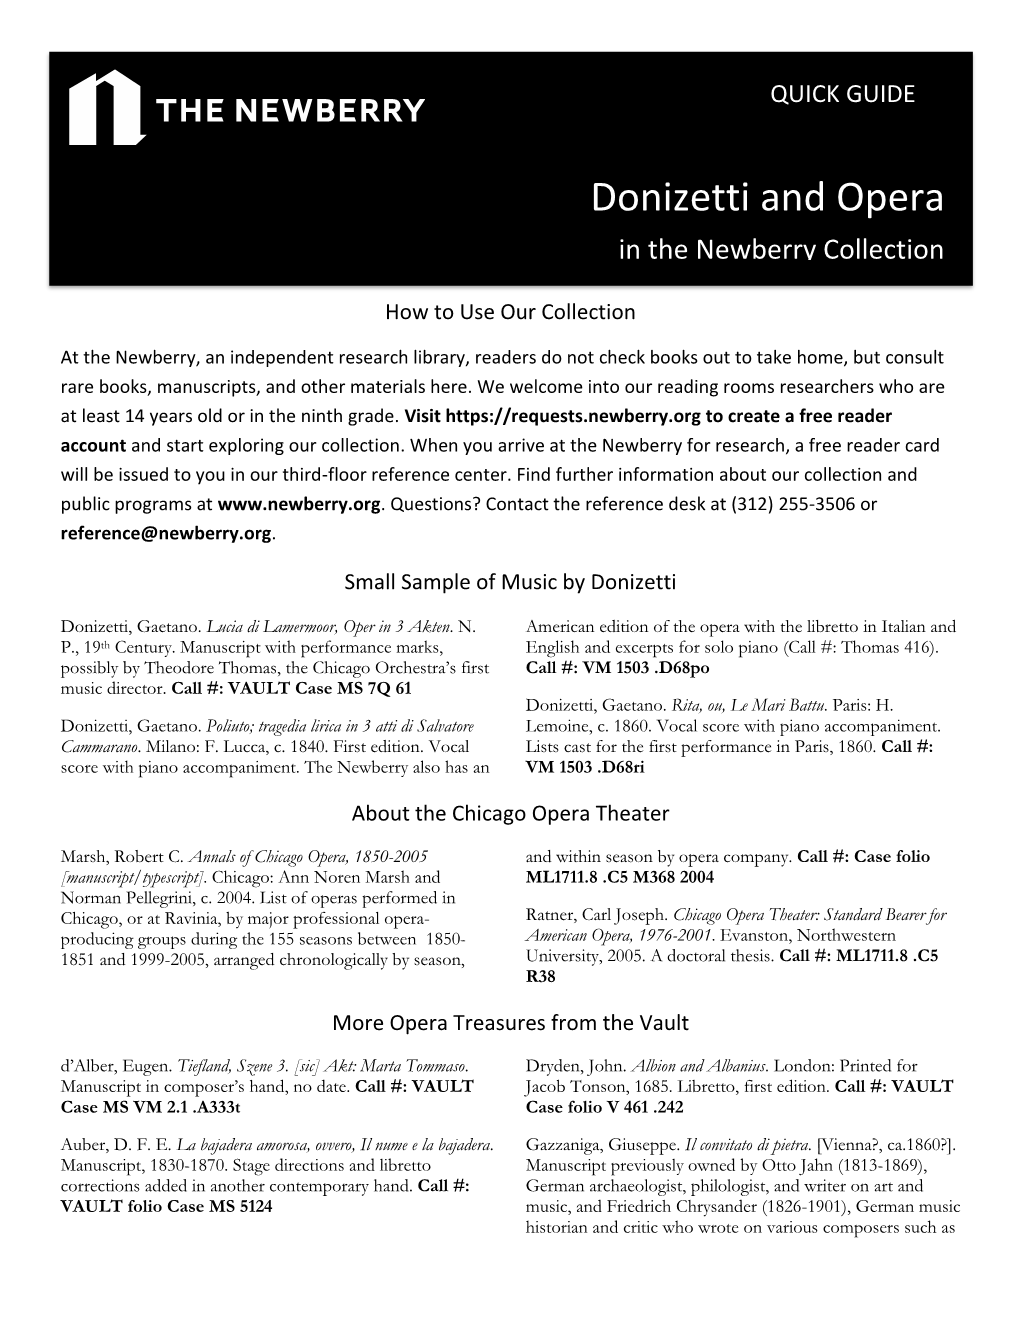 Donizetti and Opera in the Newberry Collection